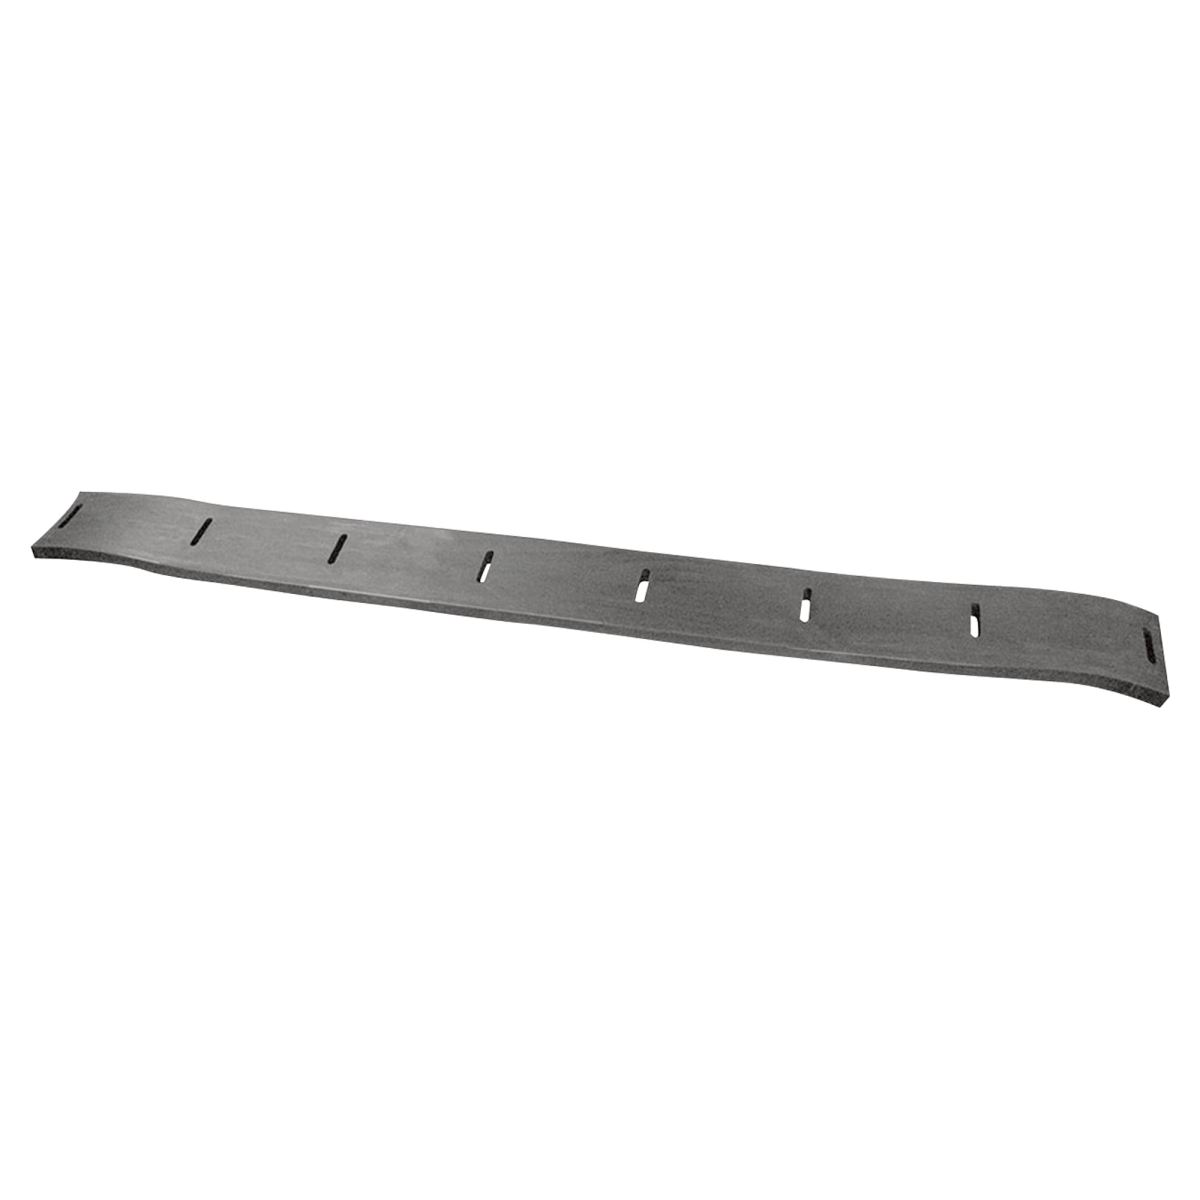 MPR08265 6 ft. x 8 in. Home Plow Rubber Cutting Edge -  Meyer